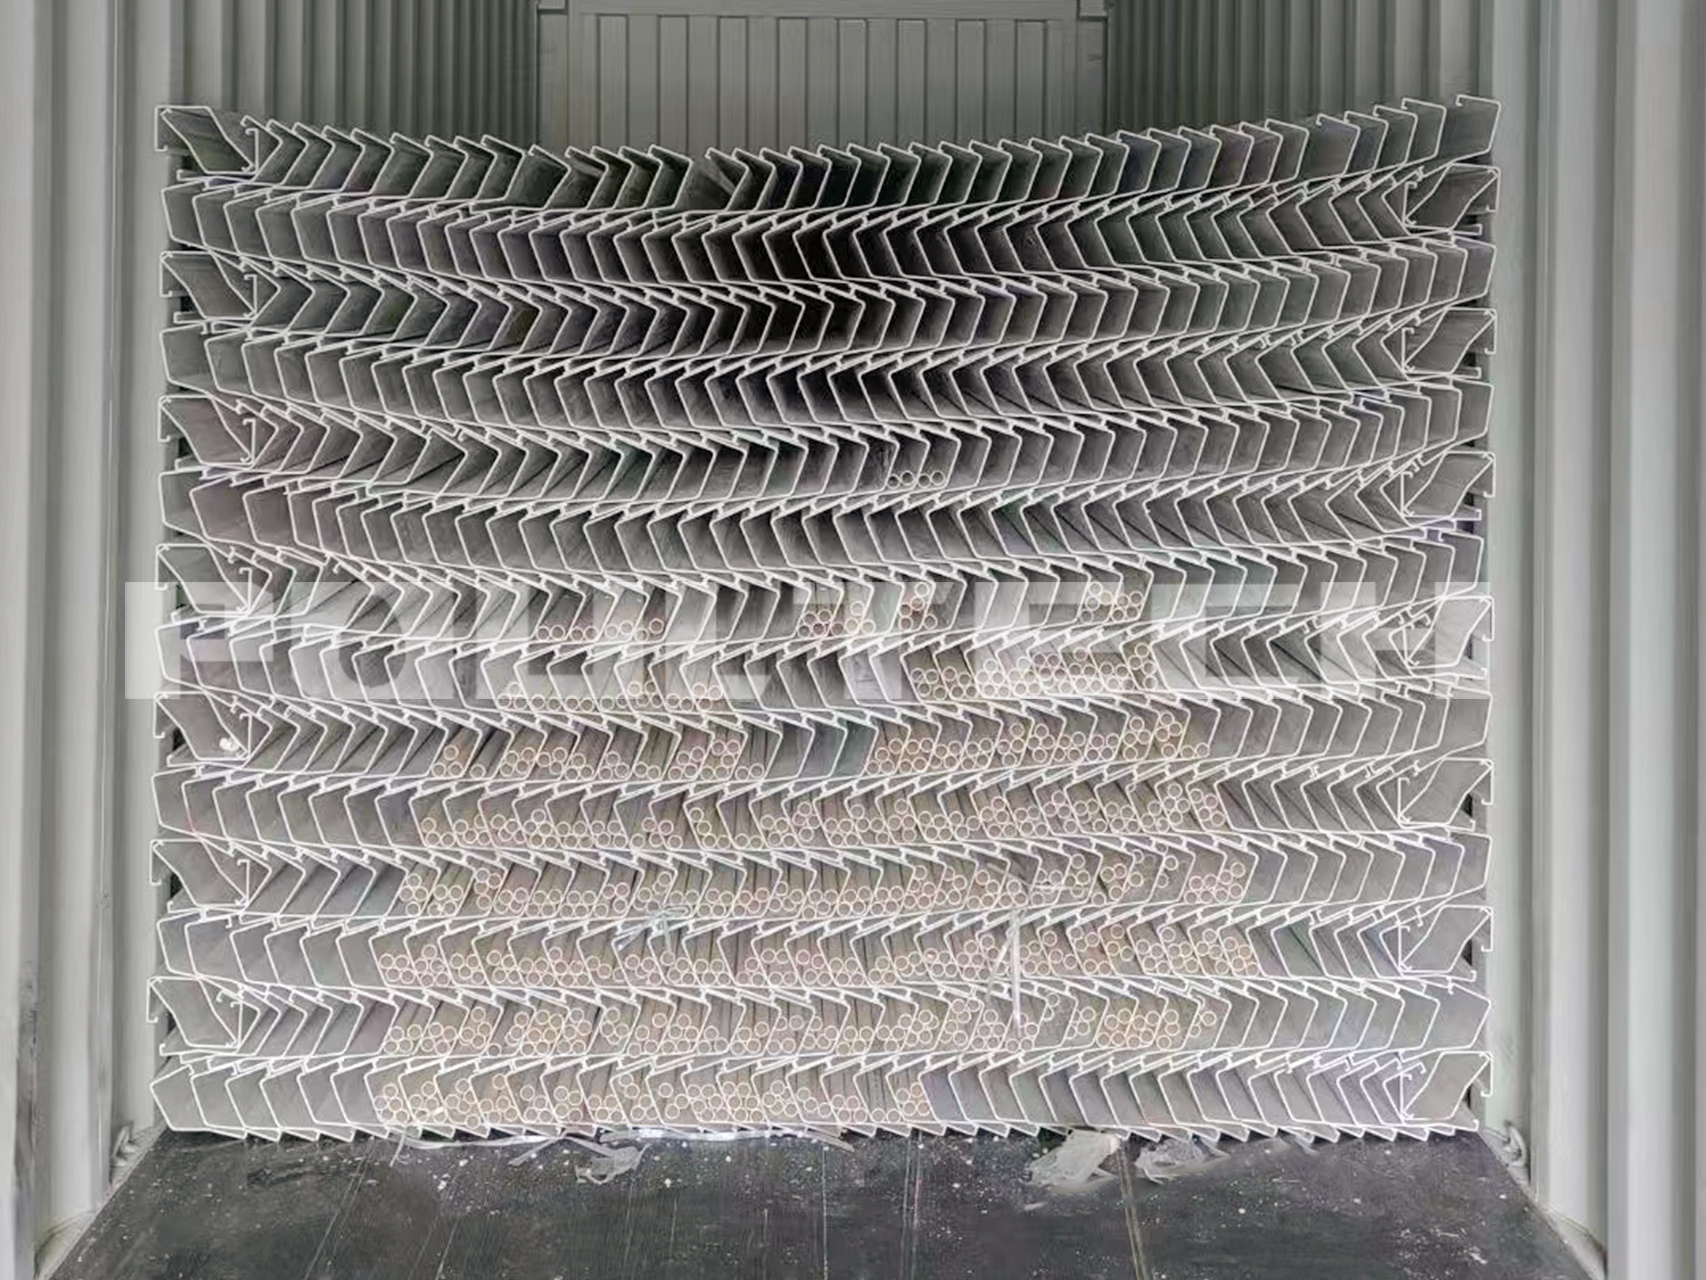 30,000 birds pullet cage equipment will be delivered to Nigeria customer